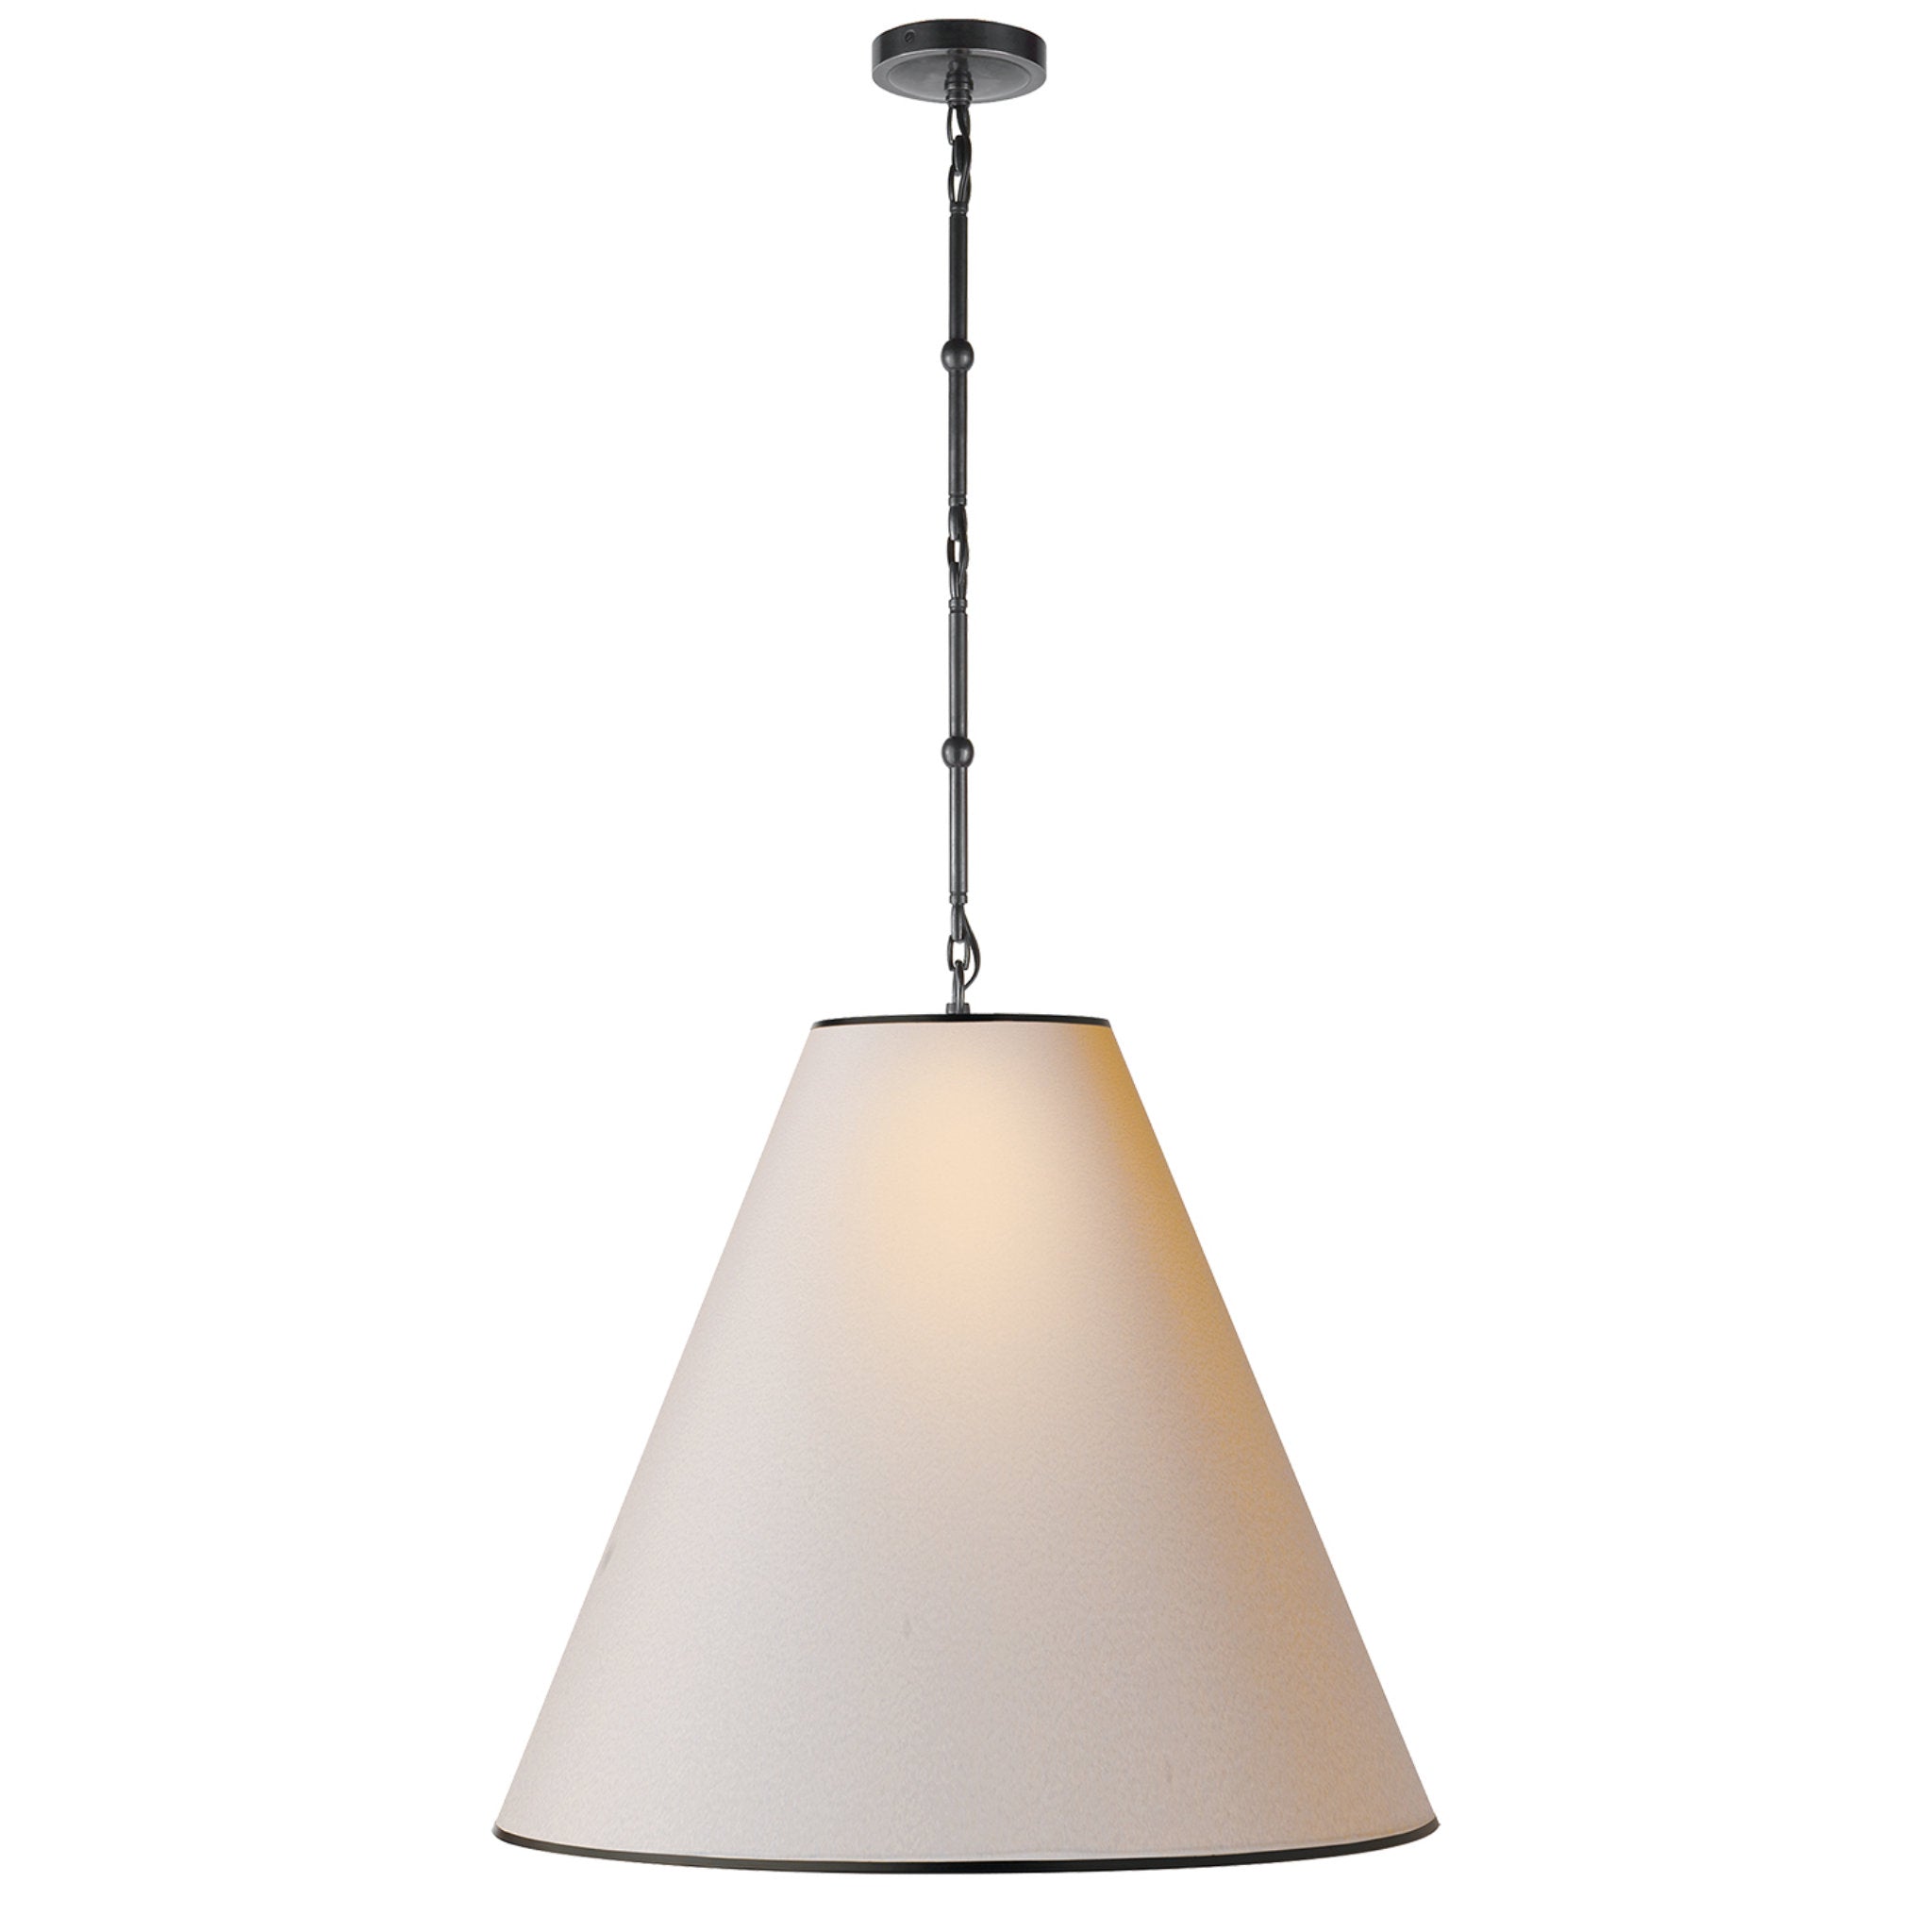 Thomas O'Brien Goodman Large Hanging Lamp in Bronze with Natural Paper Shade with Black Tape